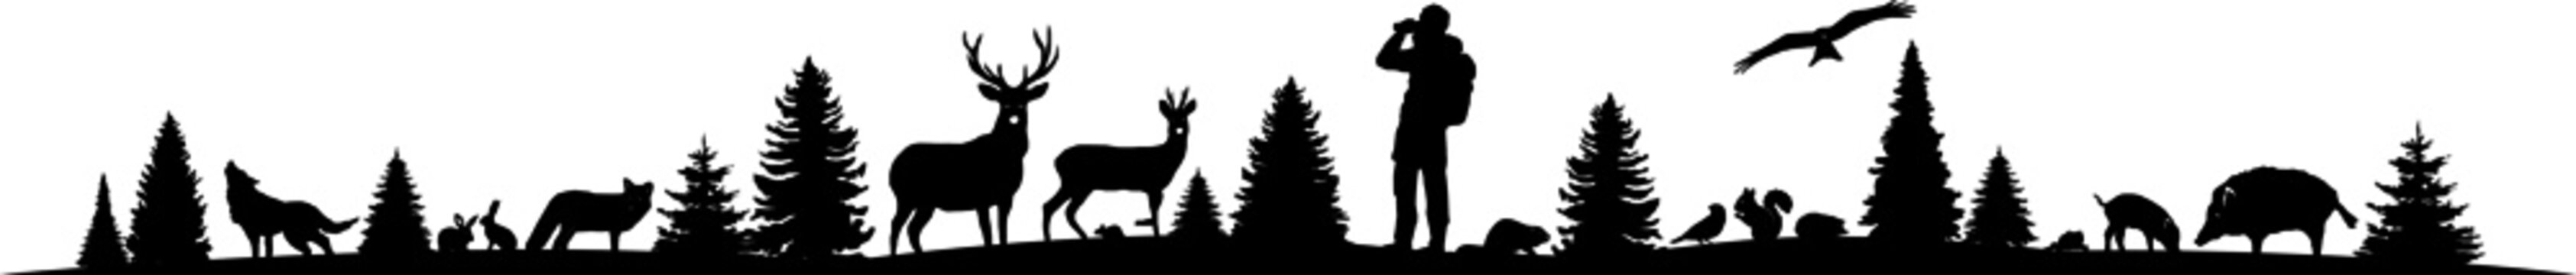 Landscape Nature Forest Animal Silhouette Vector